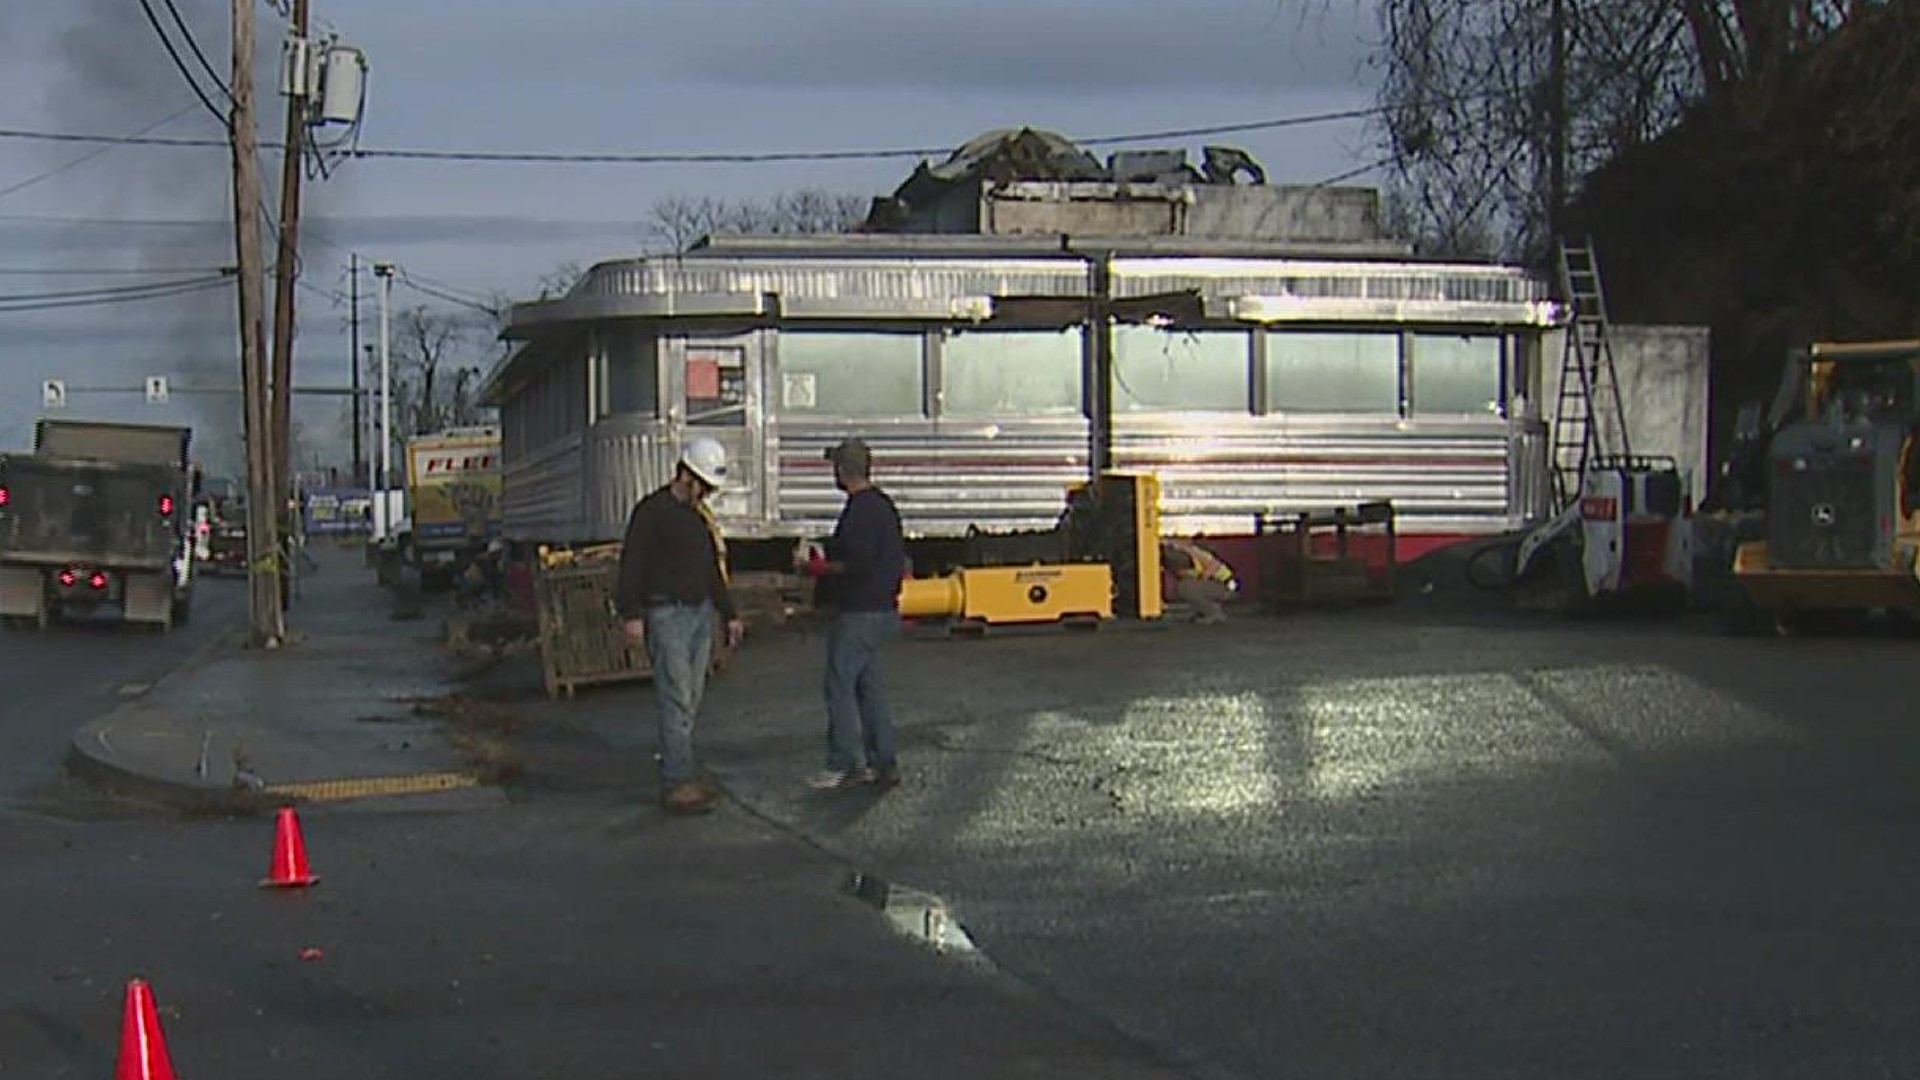 The nearly 40-year diner is being forced to move because of the I-83 Capital Beltway Redesign Project.